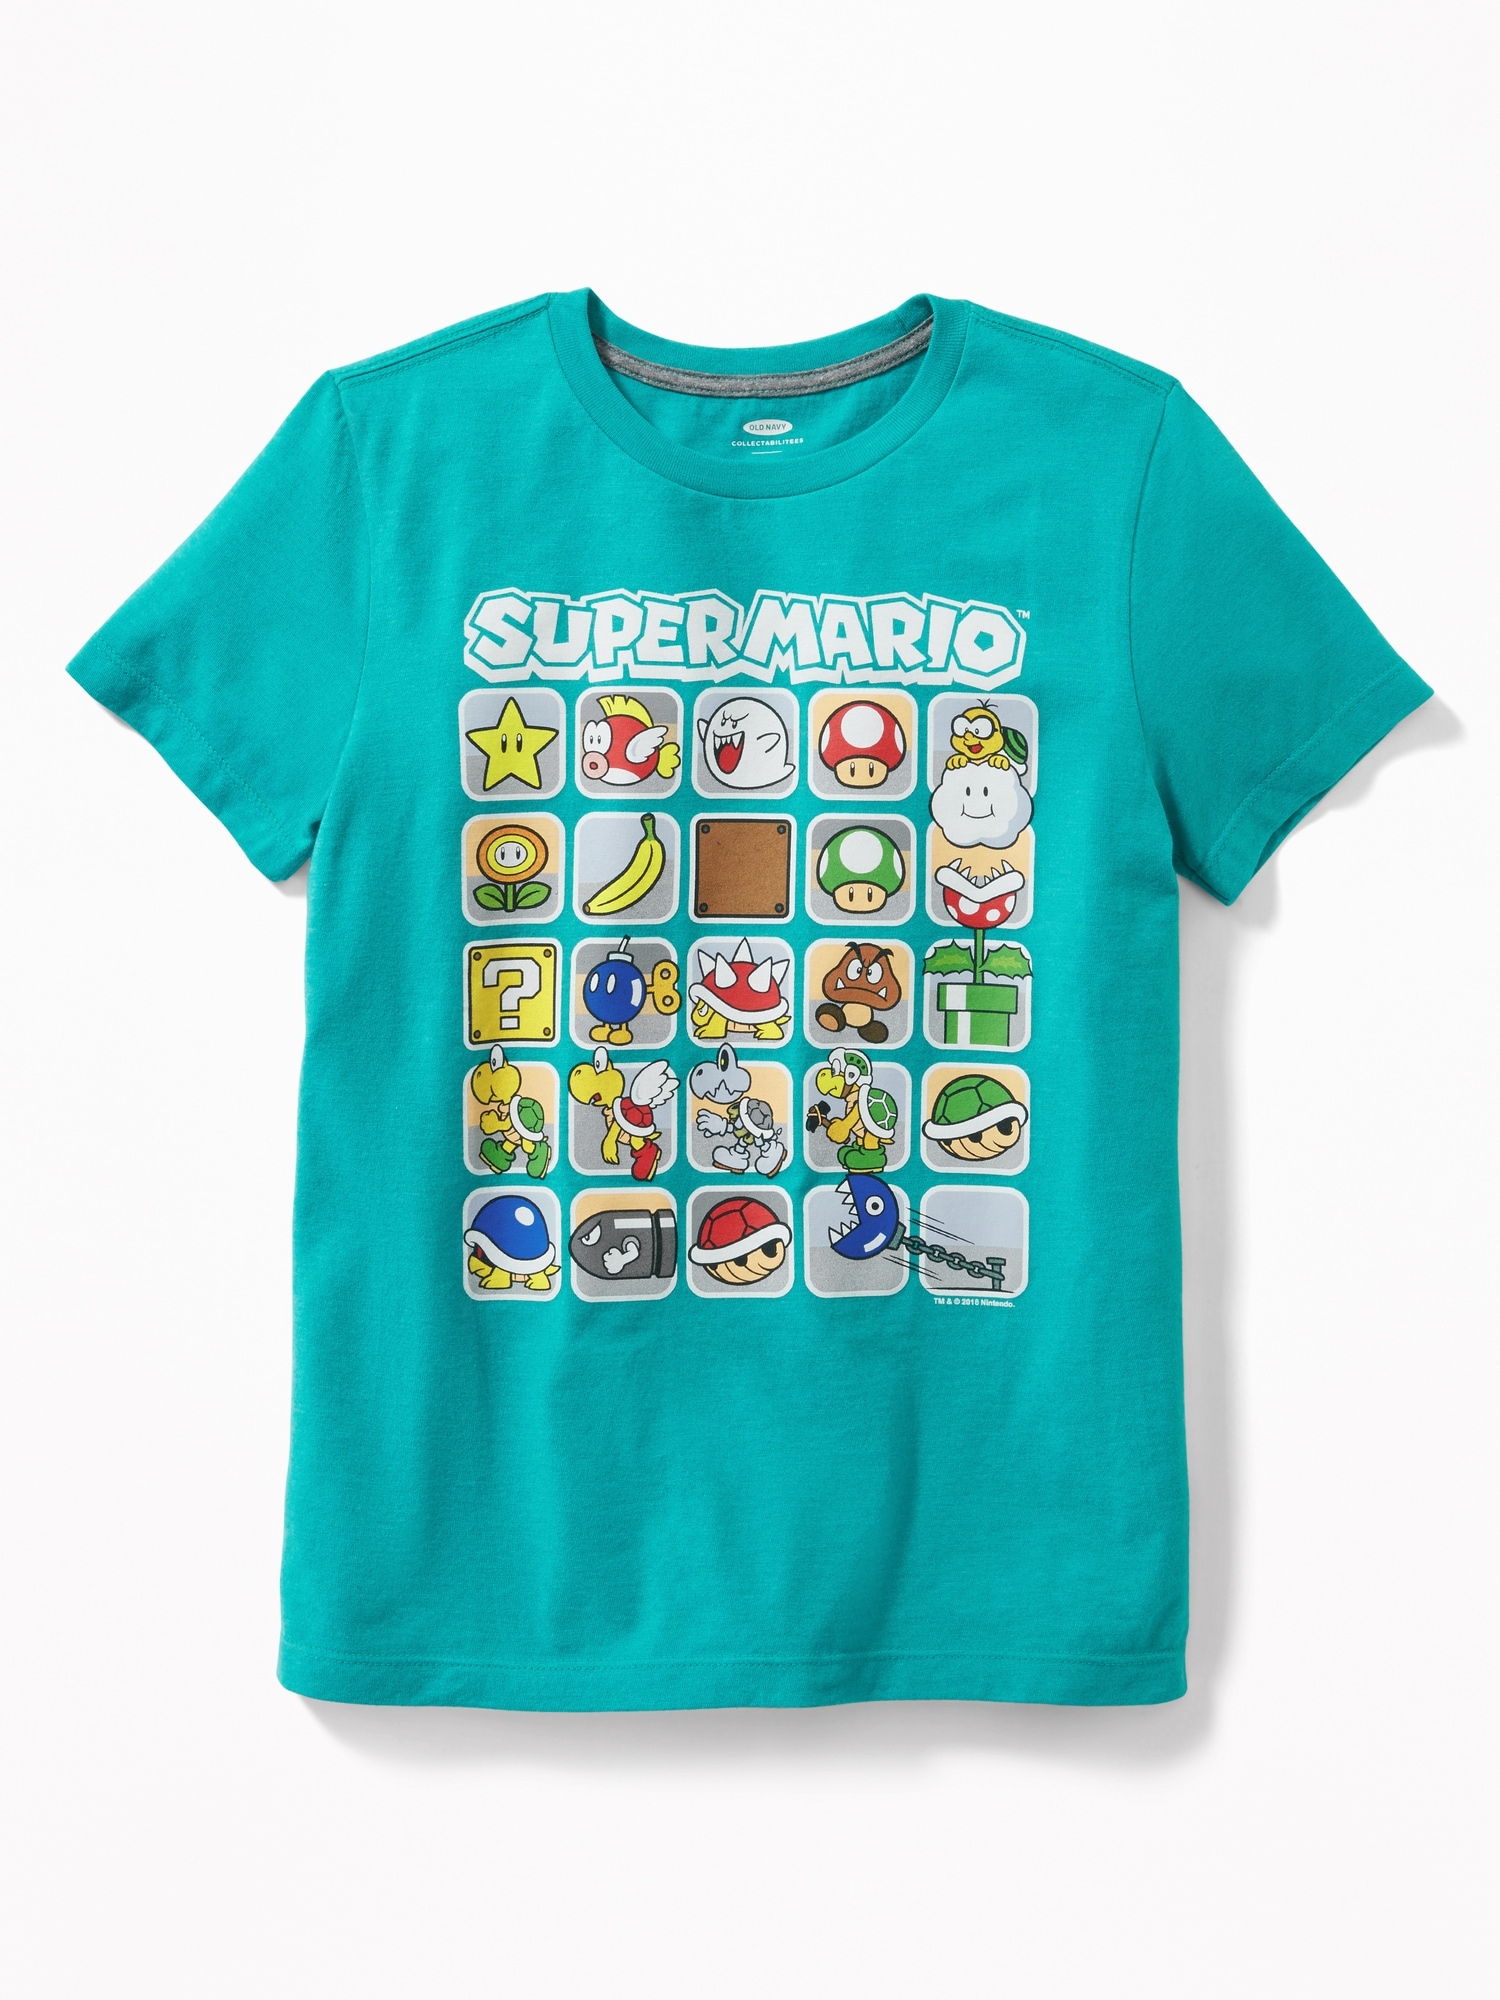 Super Mario™ Grid Graphic Tee for Boys | Old Navy